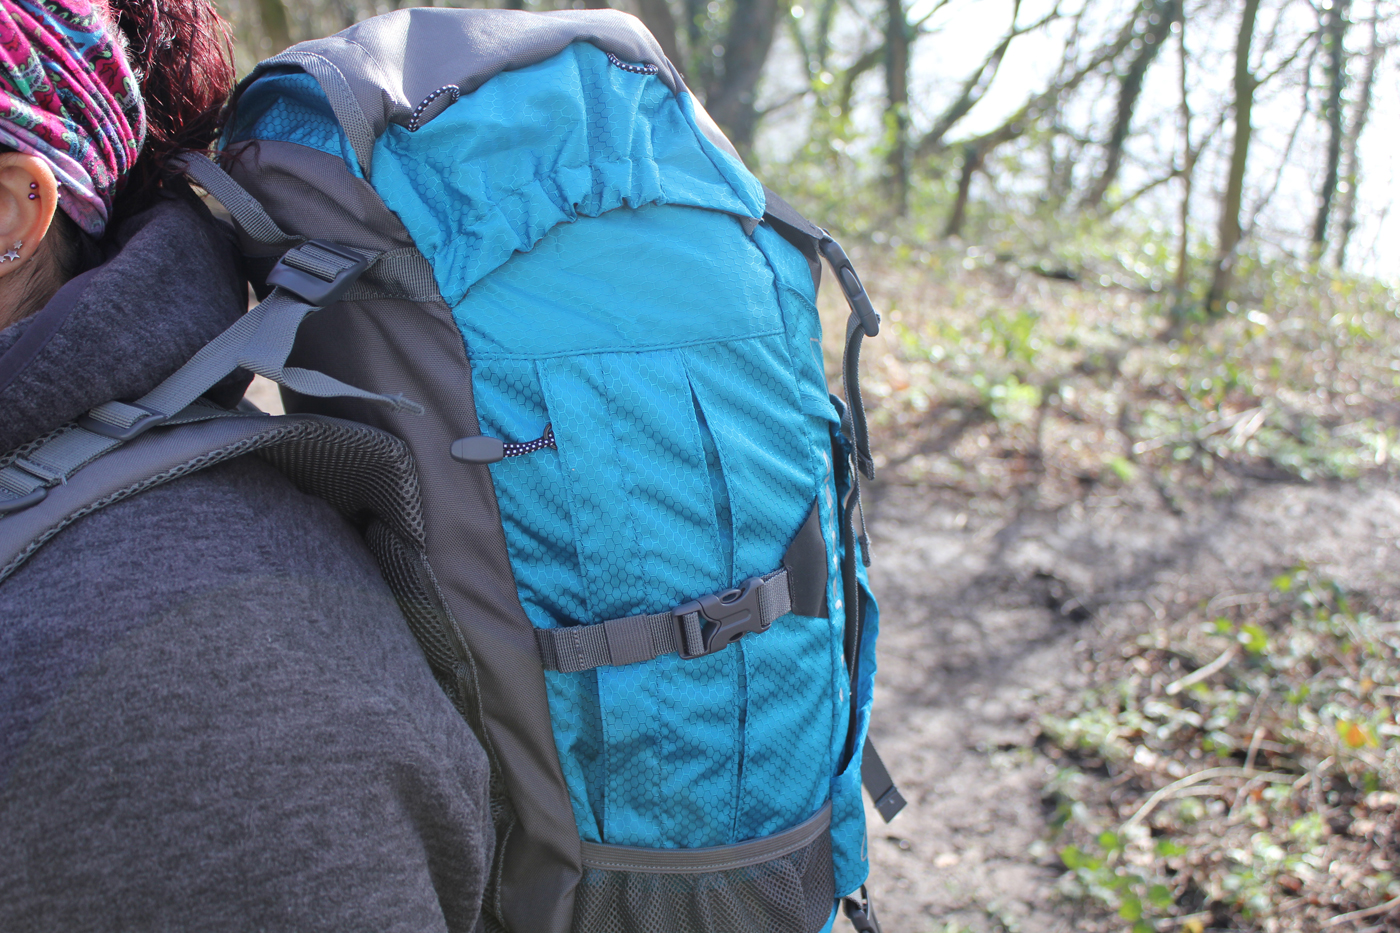 Planet Camping Highlander Discovery Rucksack - Review